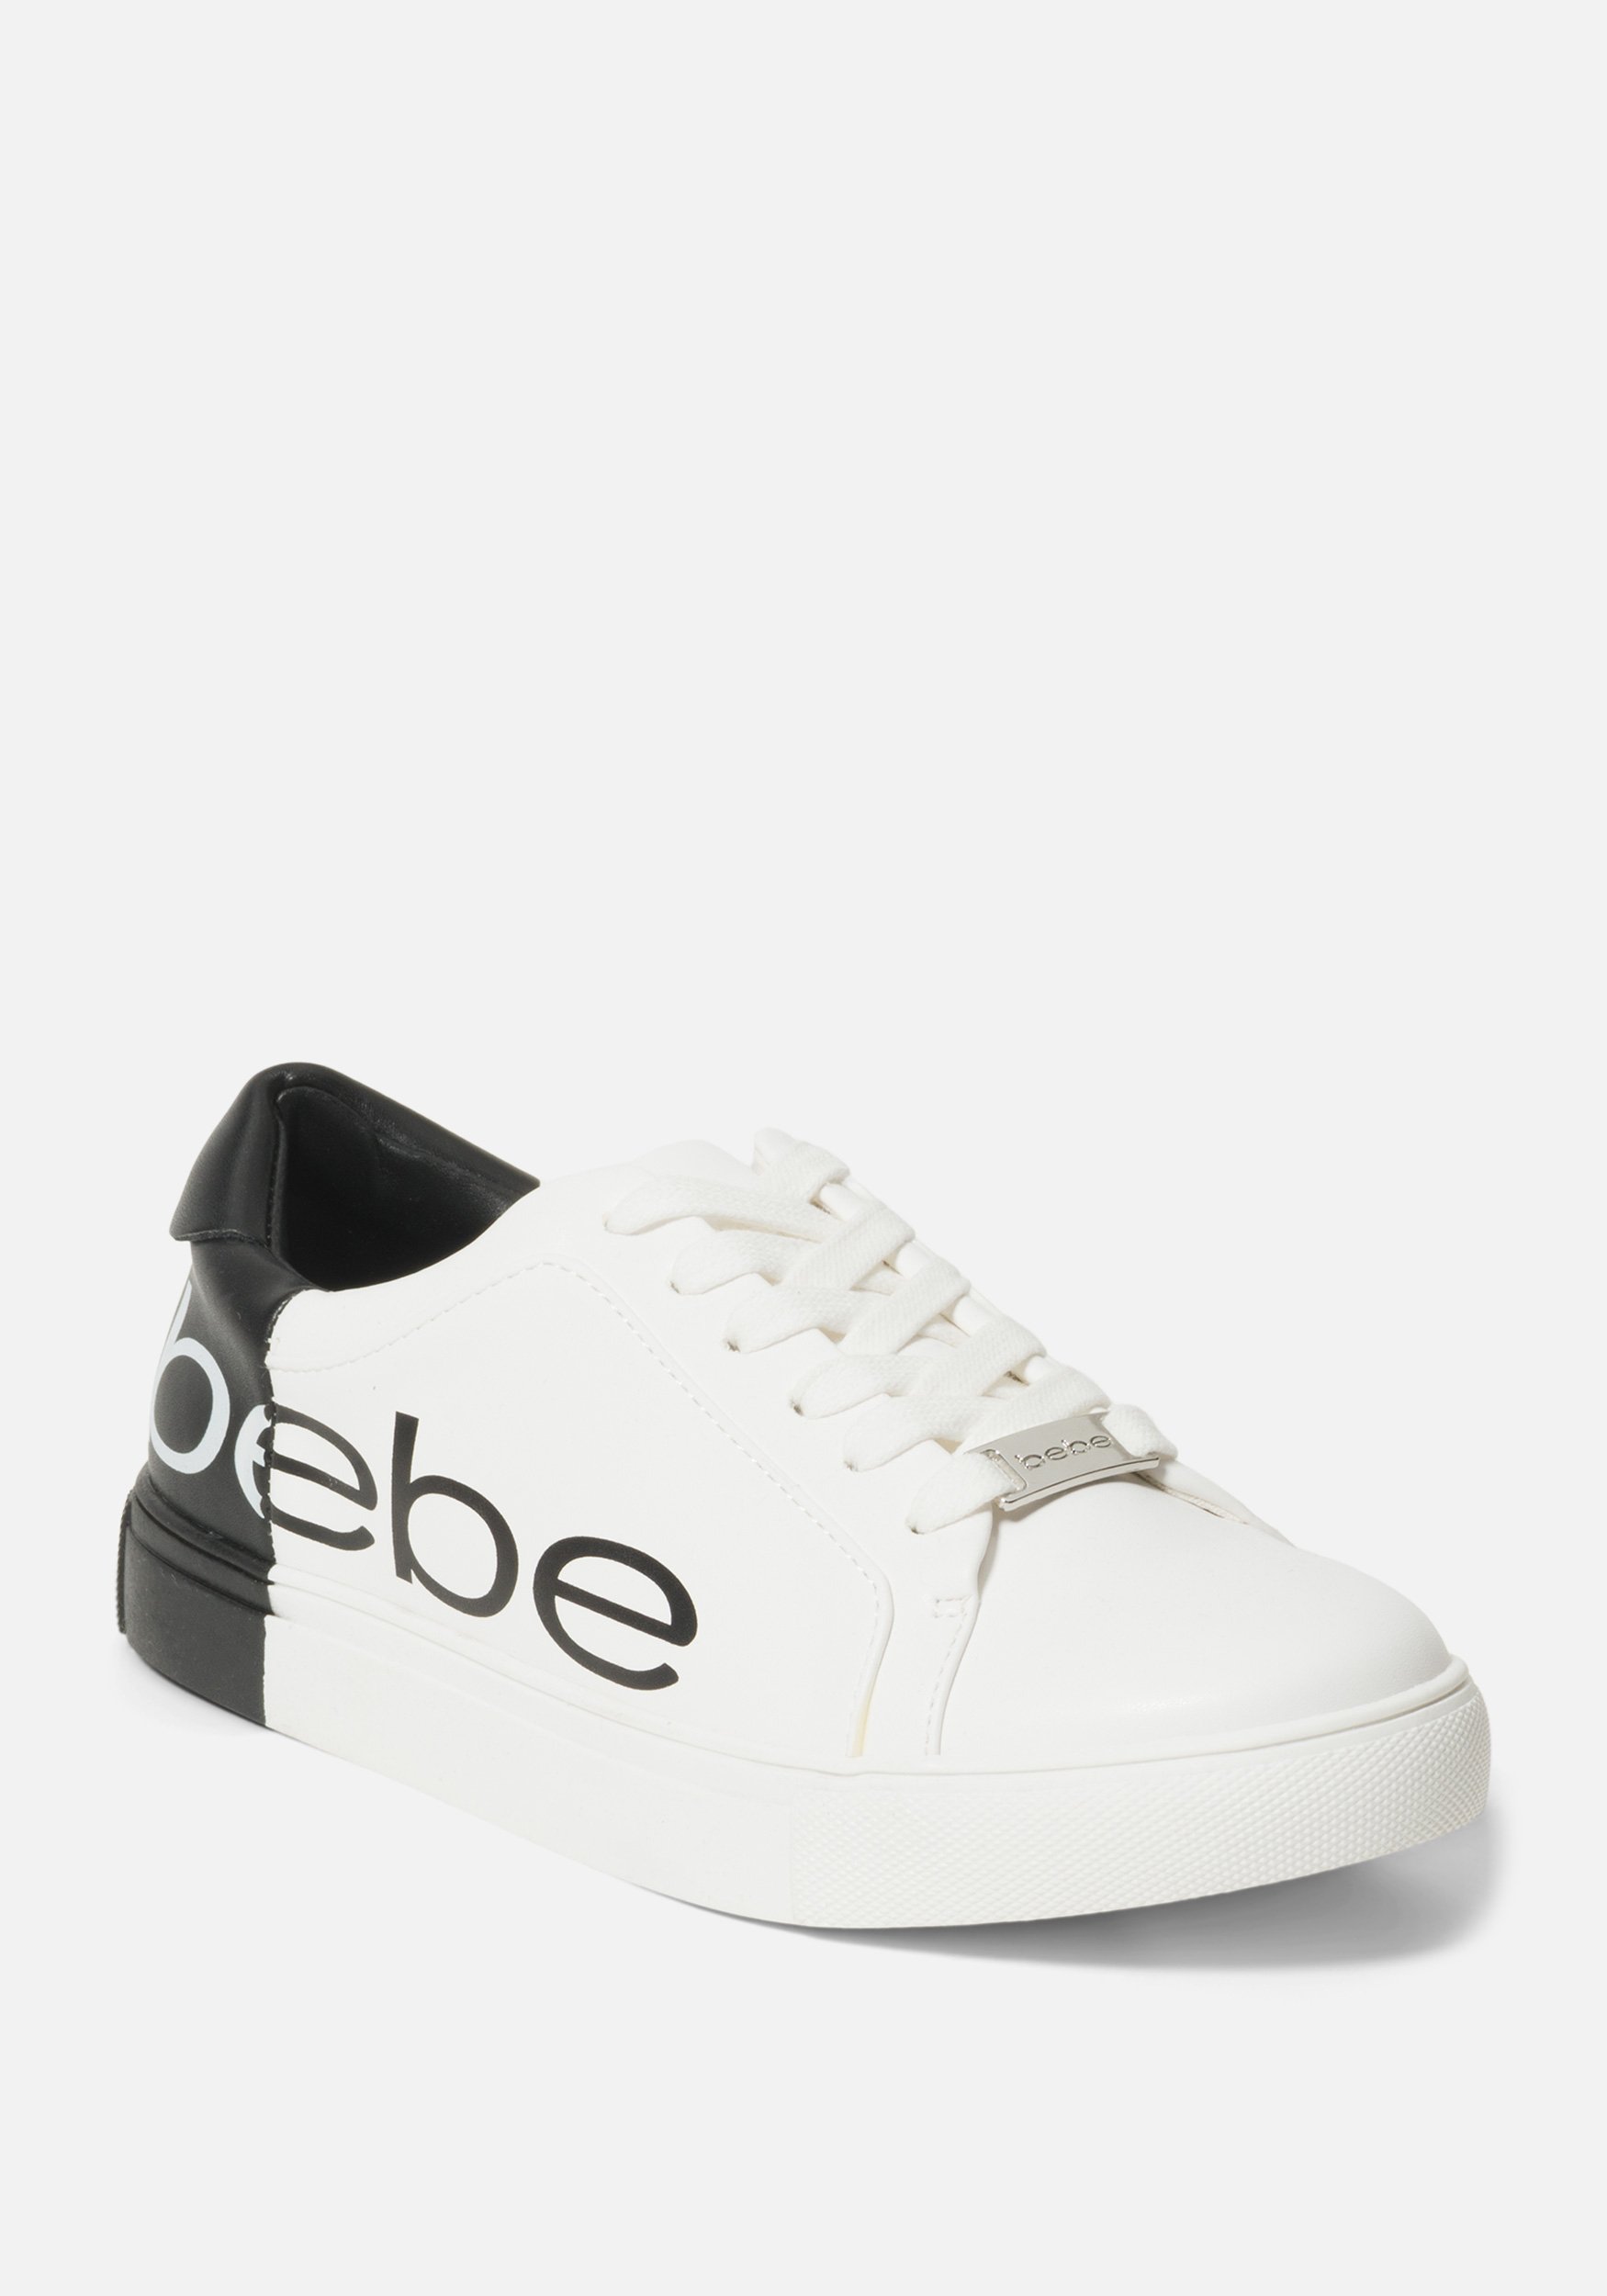 Women's Charley Bebe Logo Sneakers, Size 10 in White/Black Synthetic